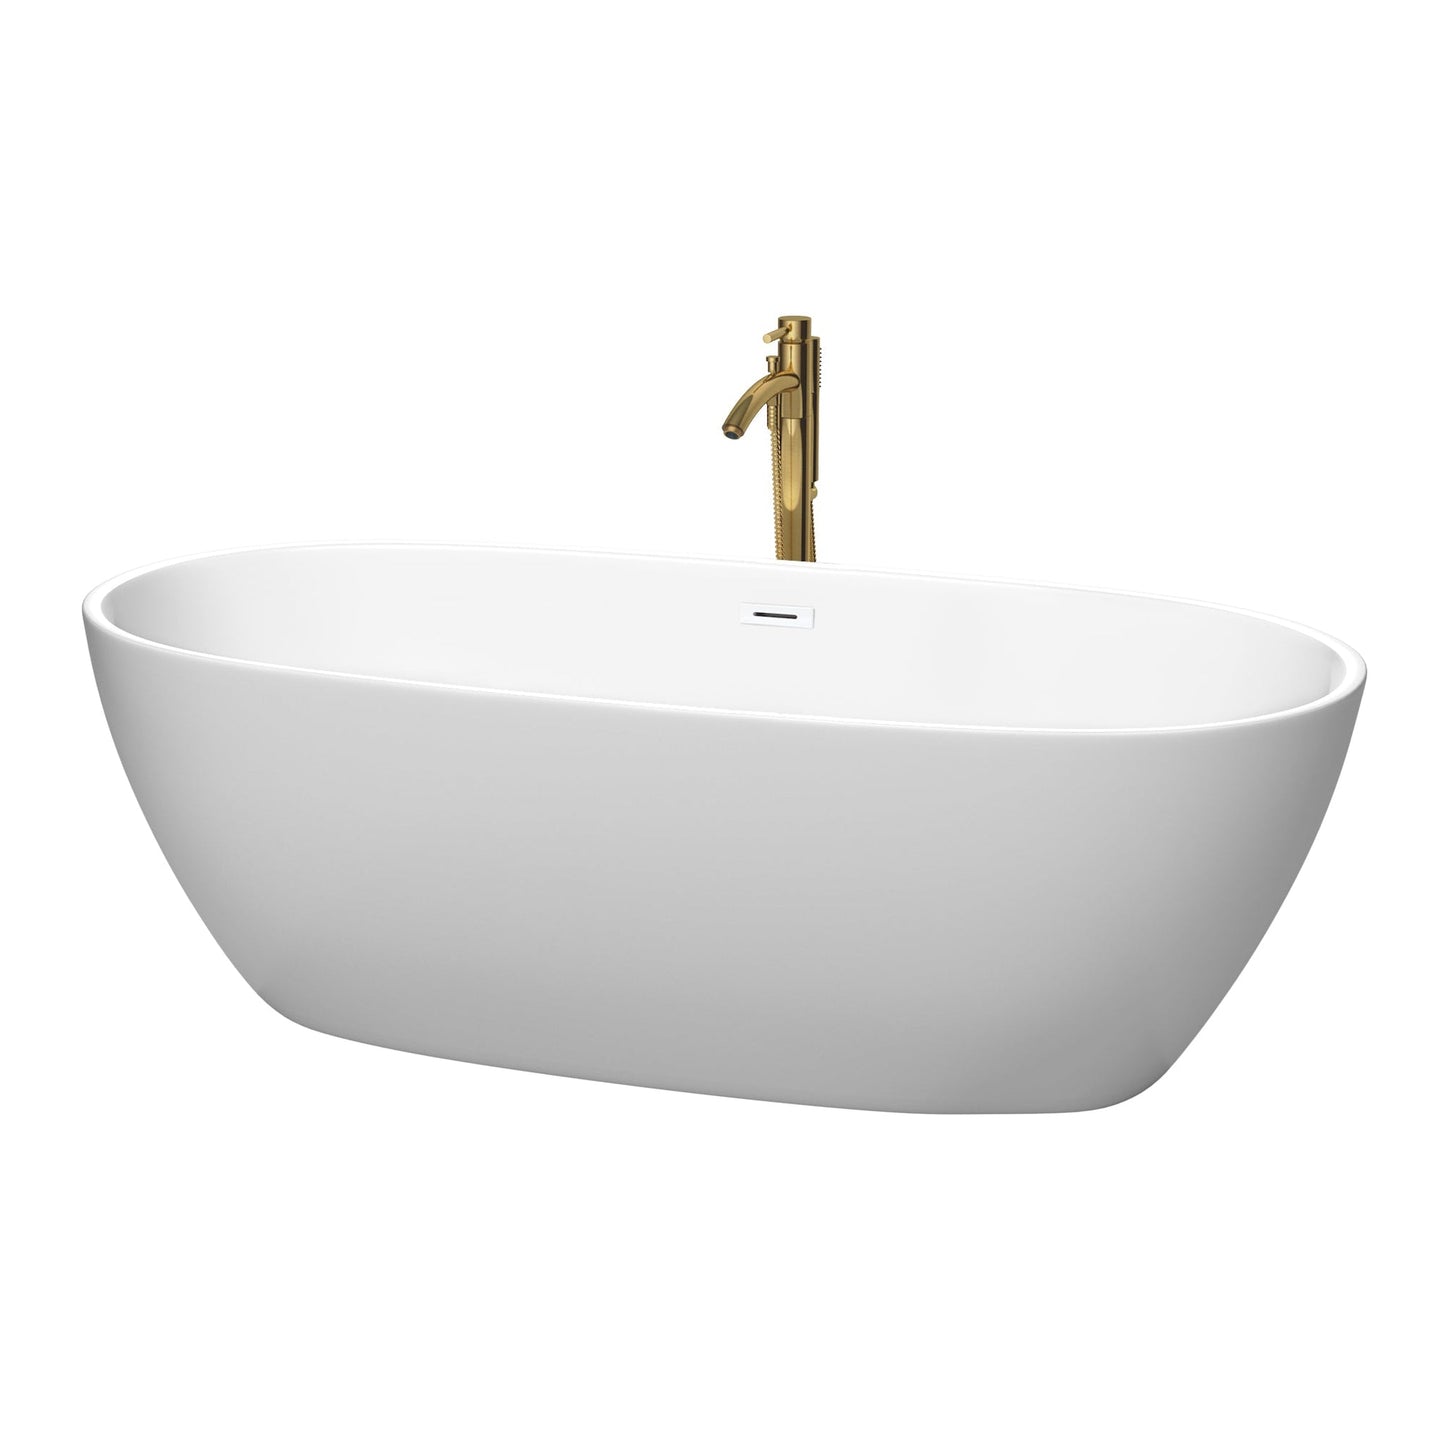 Wyndham Collection Juno 71" Freestanding Bathtub in Matte White With Shiny White Trim and Floor Mounted Faucet in Brushed Gold